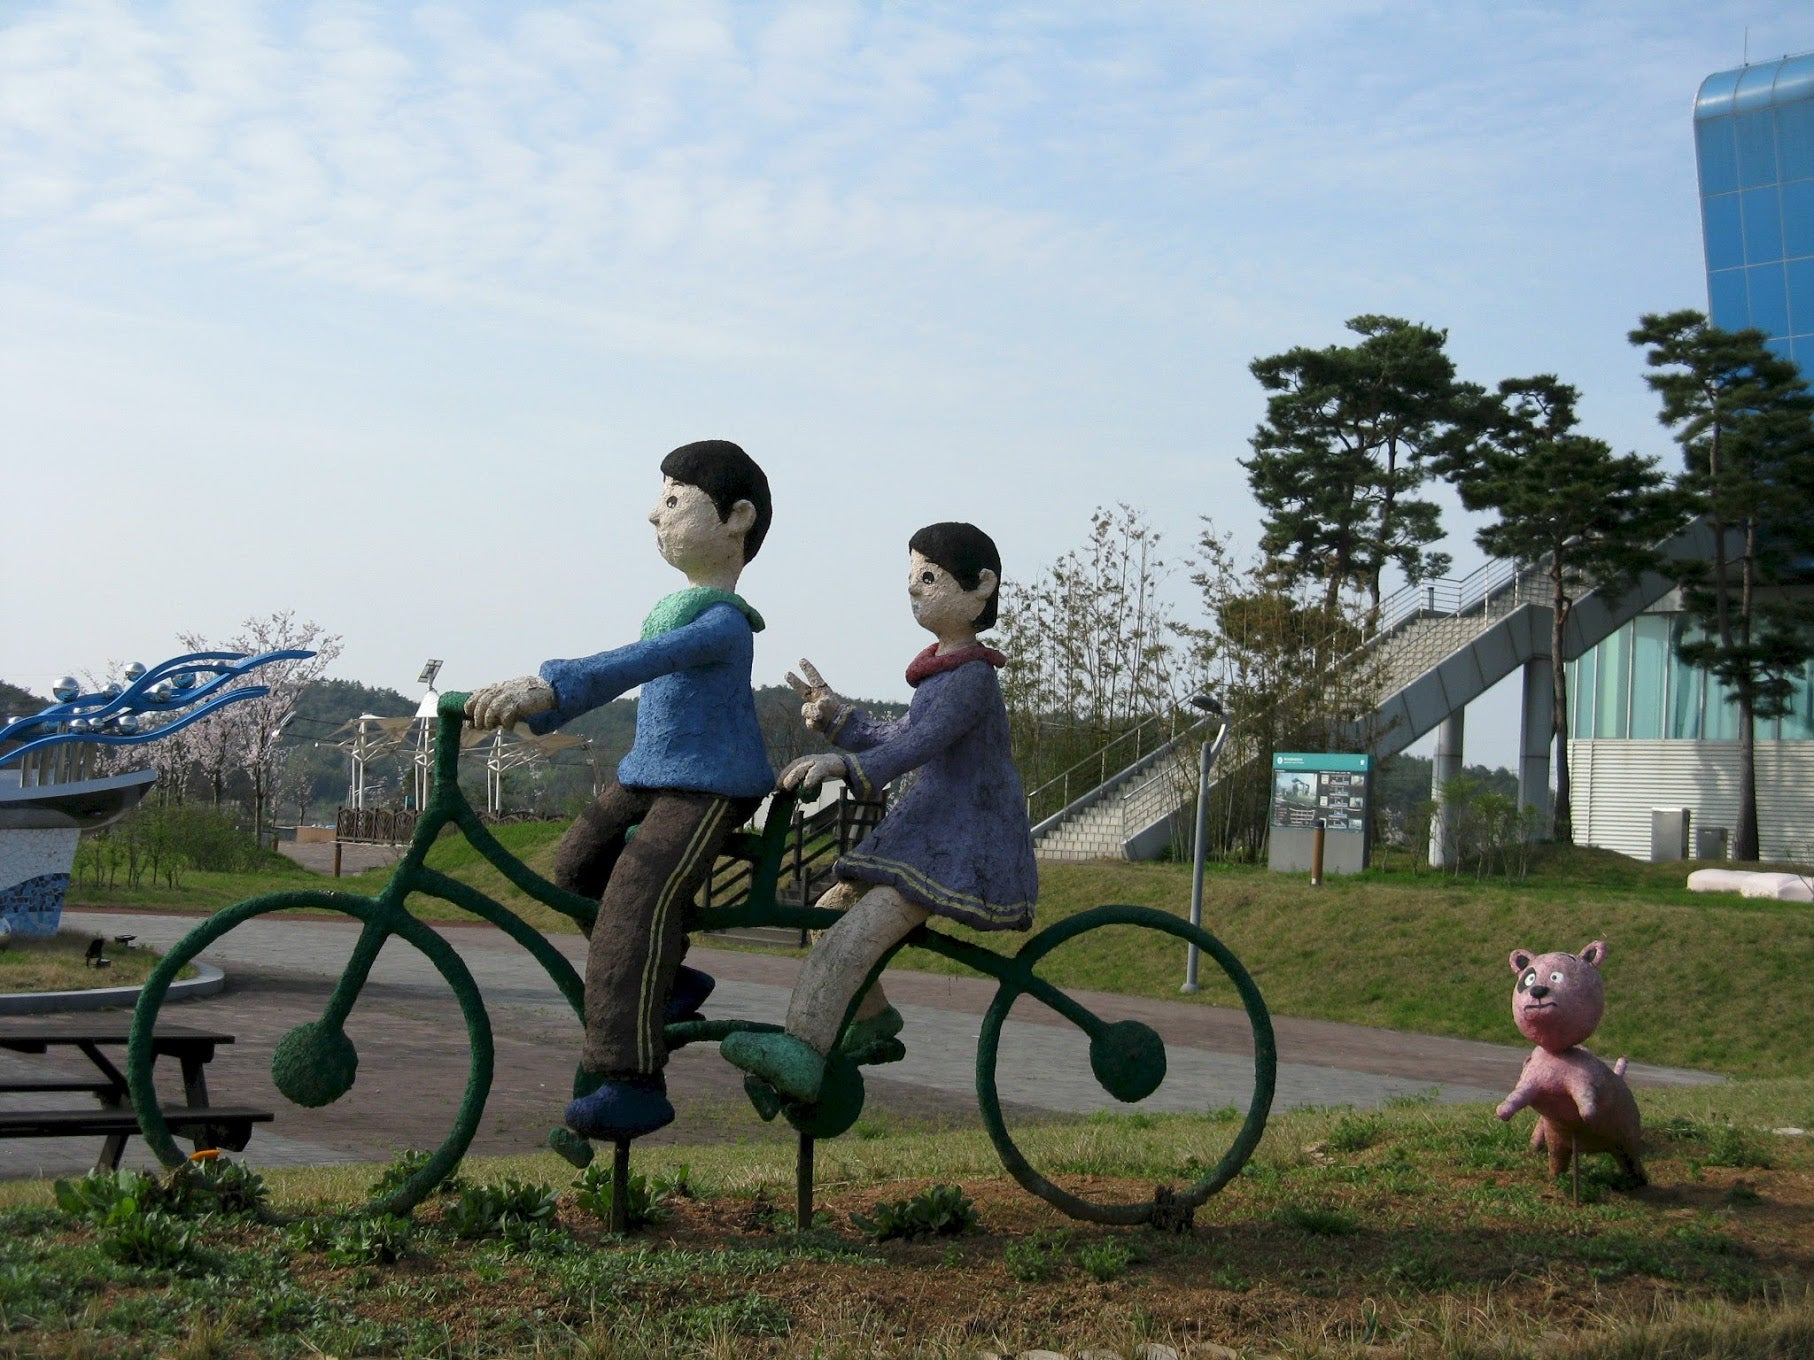 South Korea is one of the most bike-friendly countries in the world